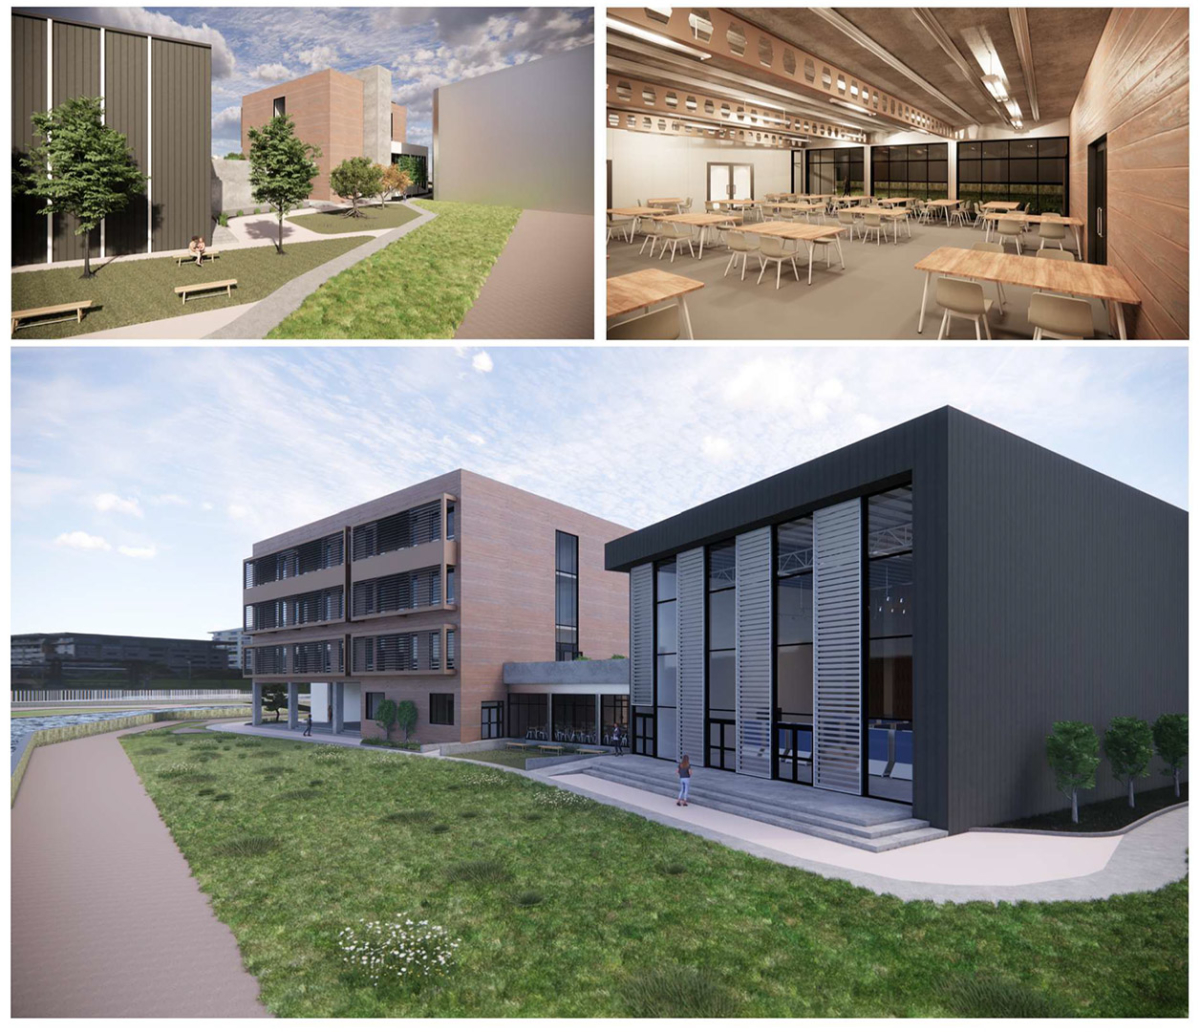 2 exterior views and interior view of the proposed Centre for Excellence for Sustainable Built Environment